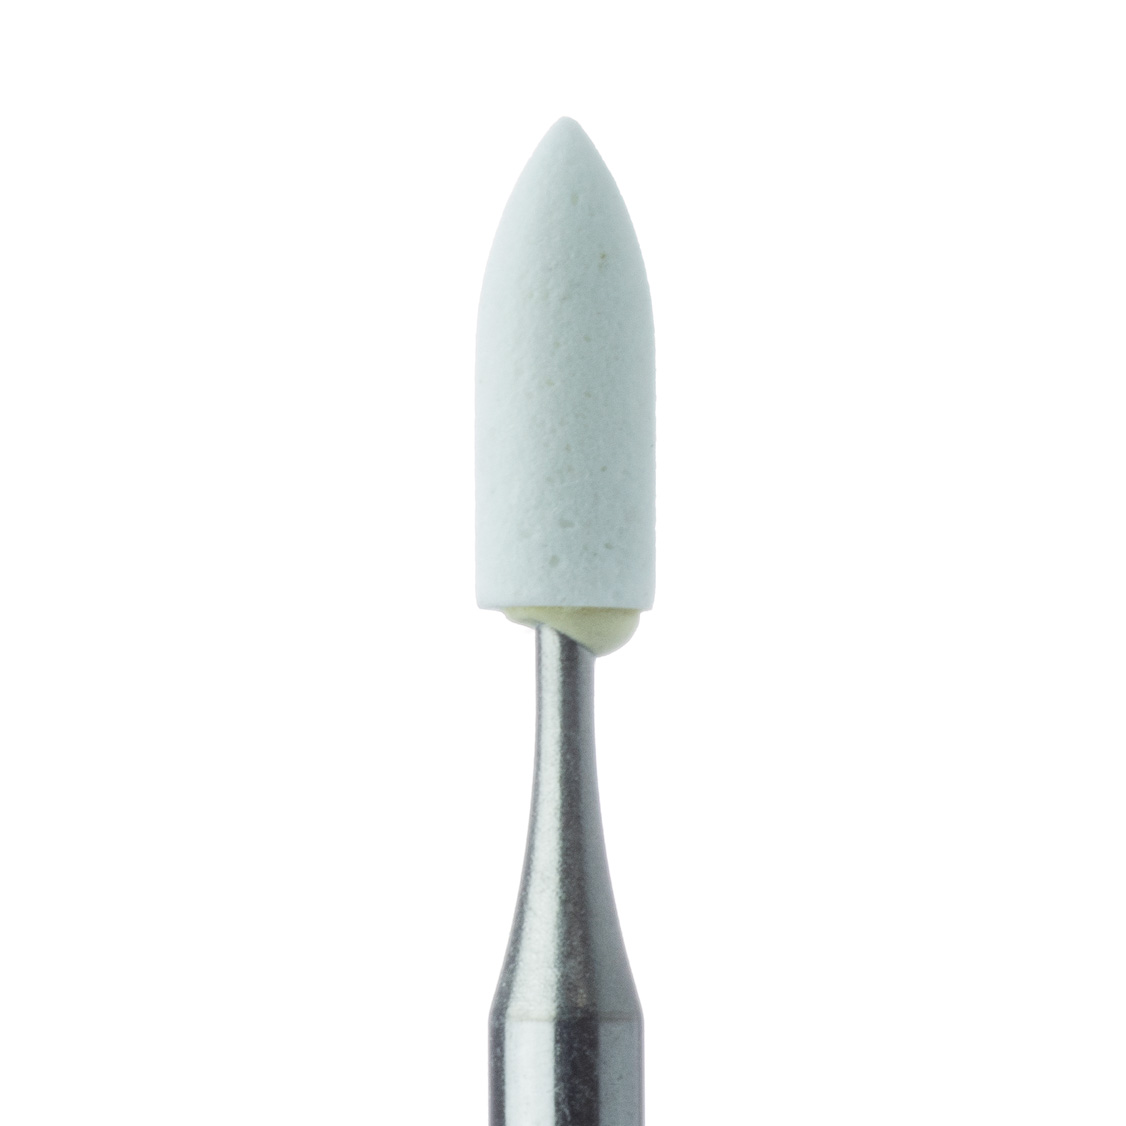 661XF-025-RA-WH Abrasive, White, Extra Fine, 2.5mm Ø, Nose Cone, RA